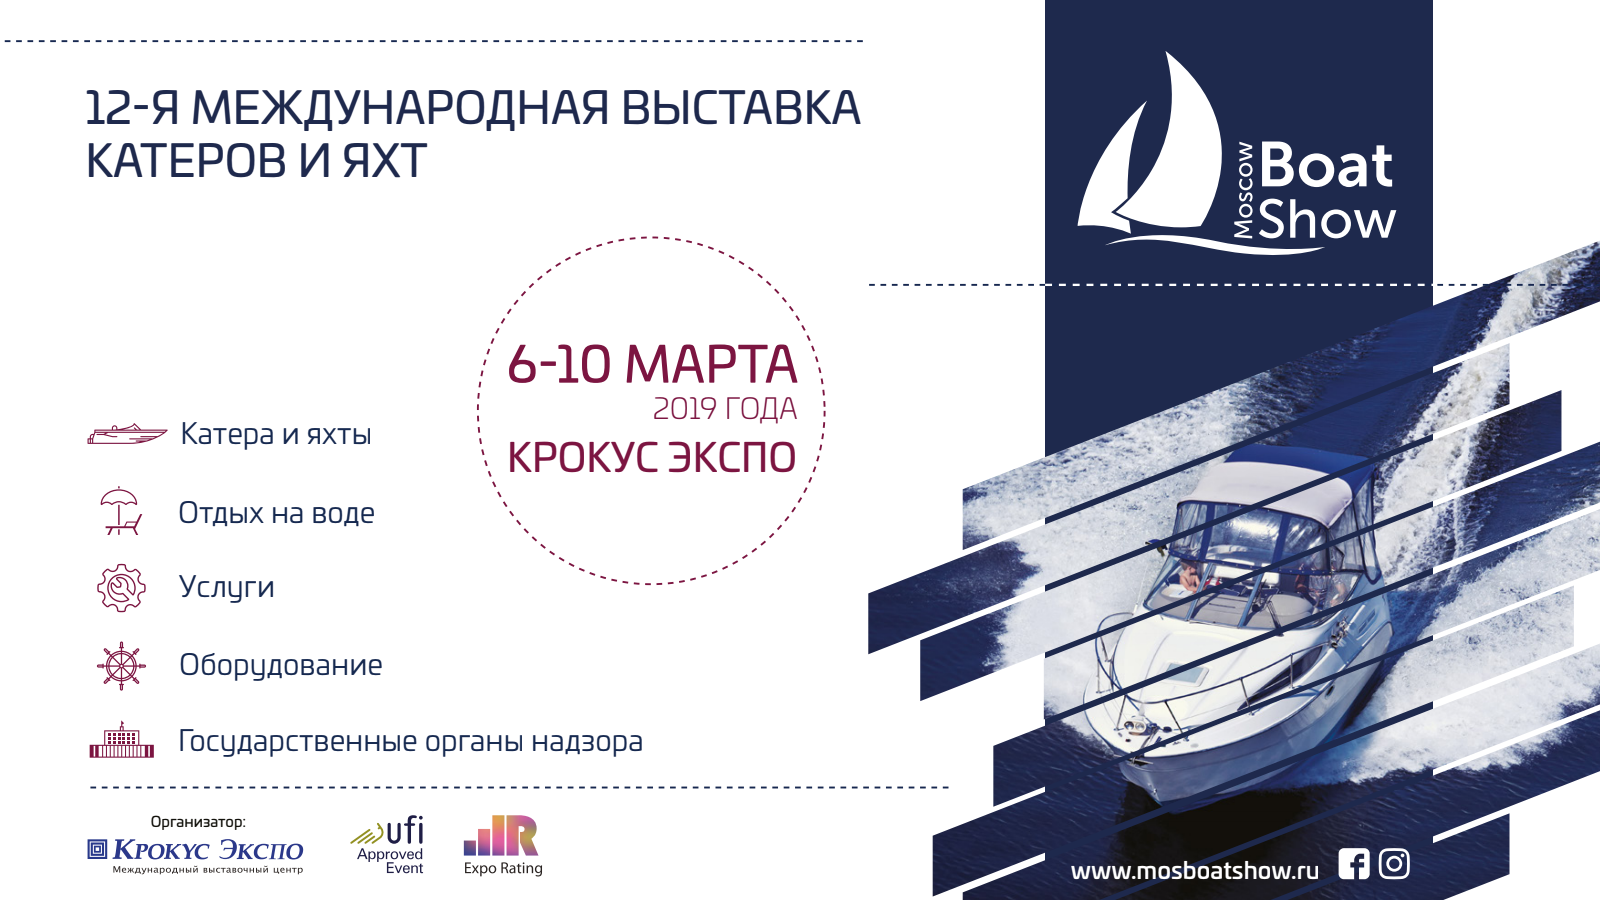 Moscow Boat Show 2019